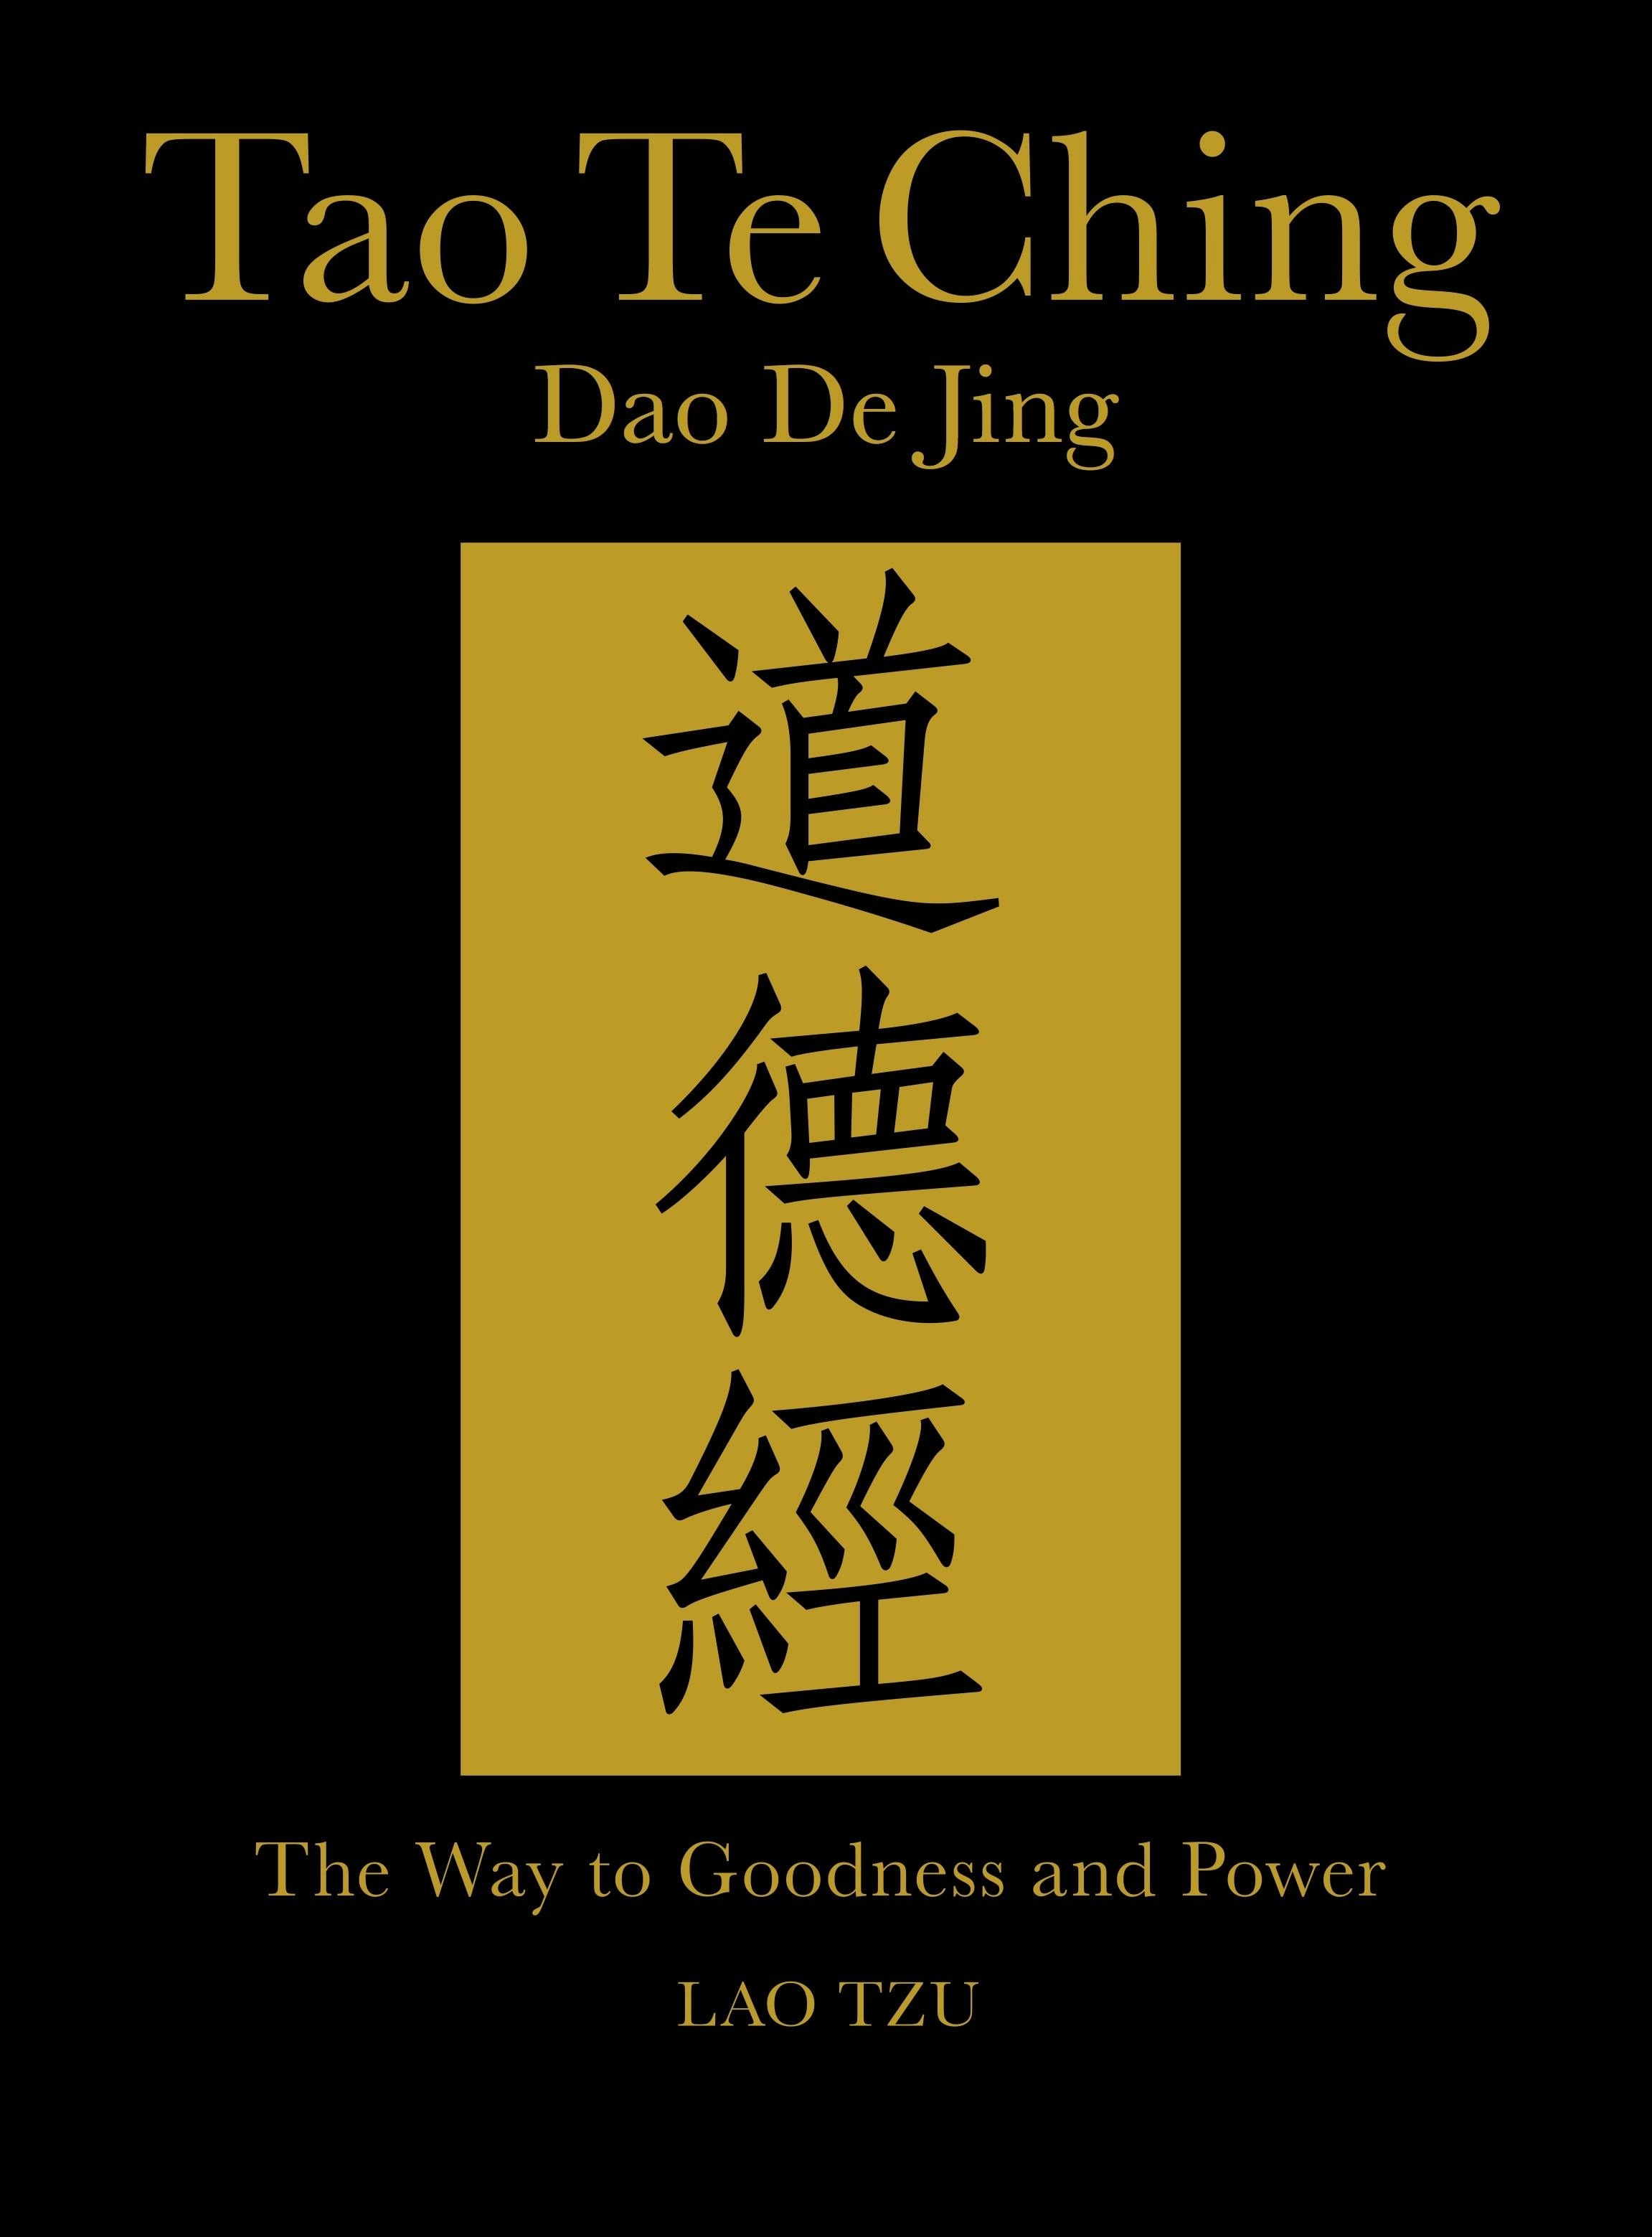 Tao Te Ching - undefined